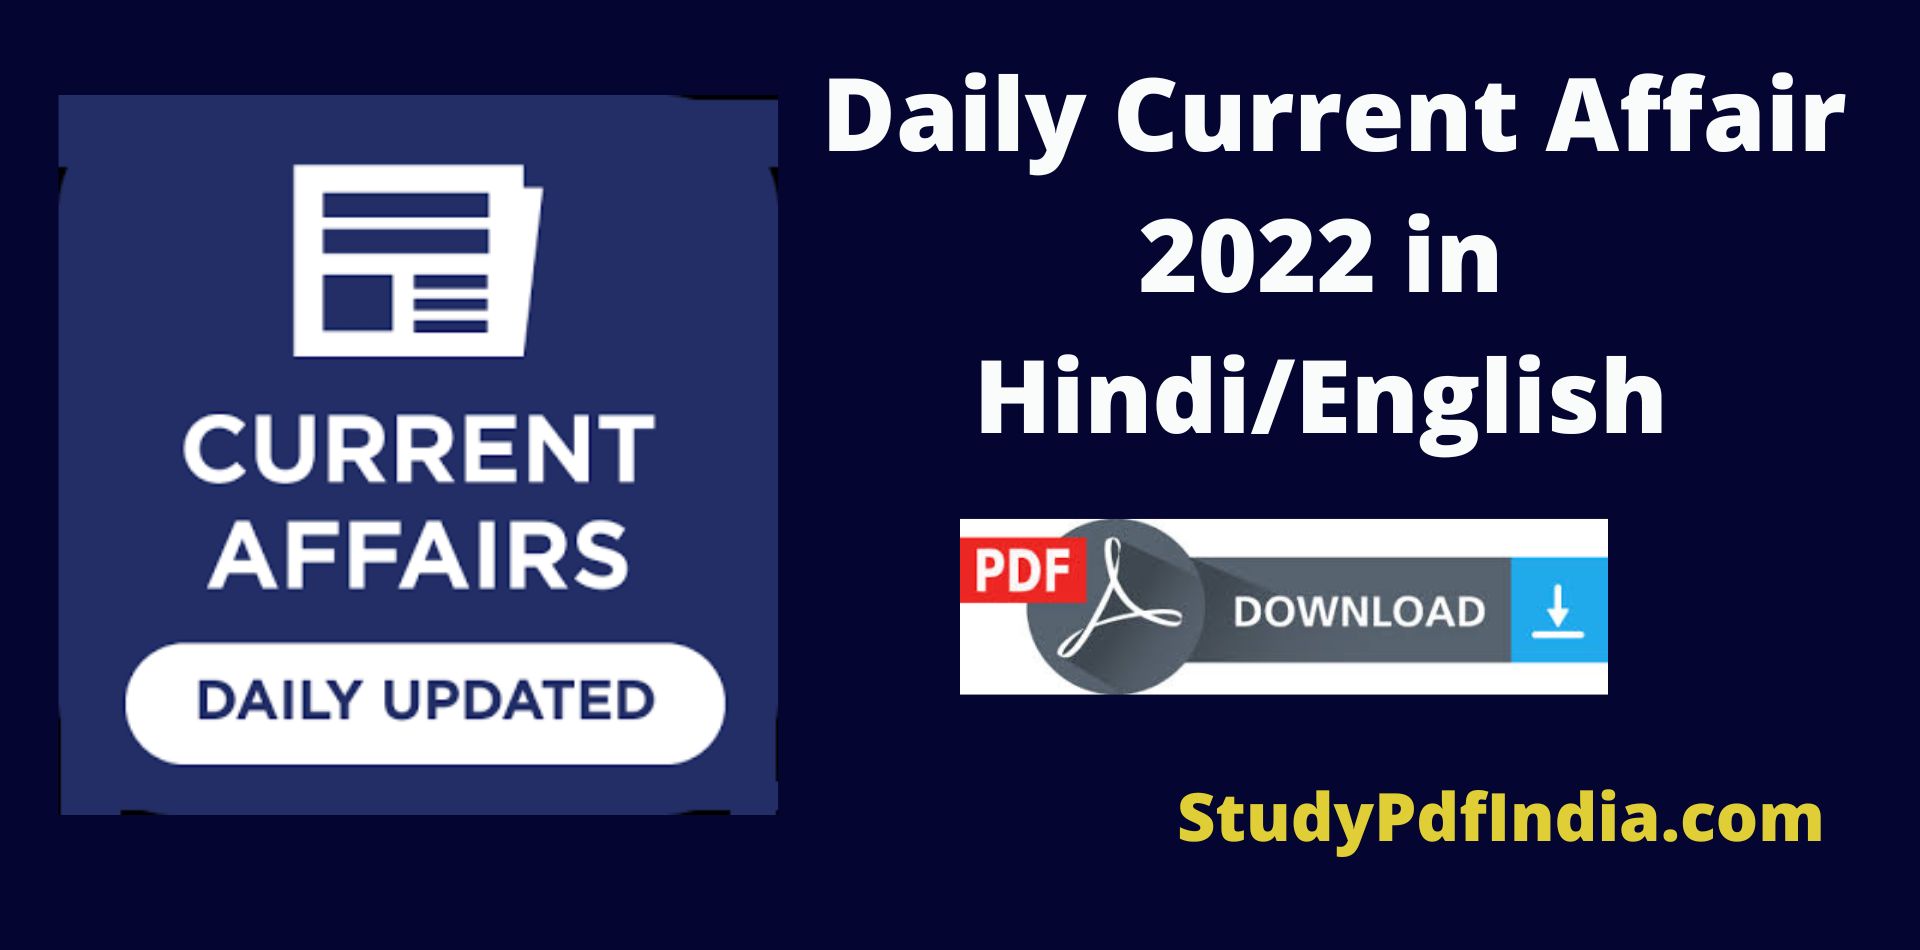 Daily Current Affair PDF Download 2022 in Hindi/English